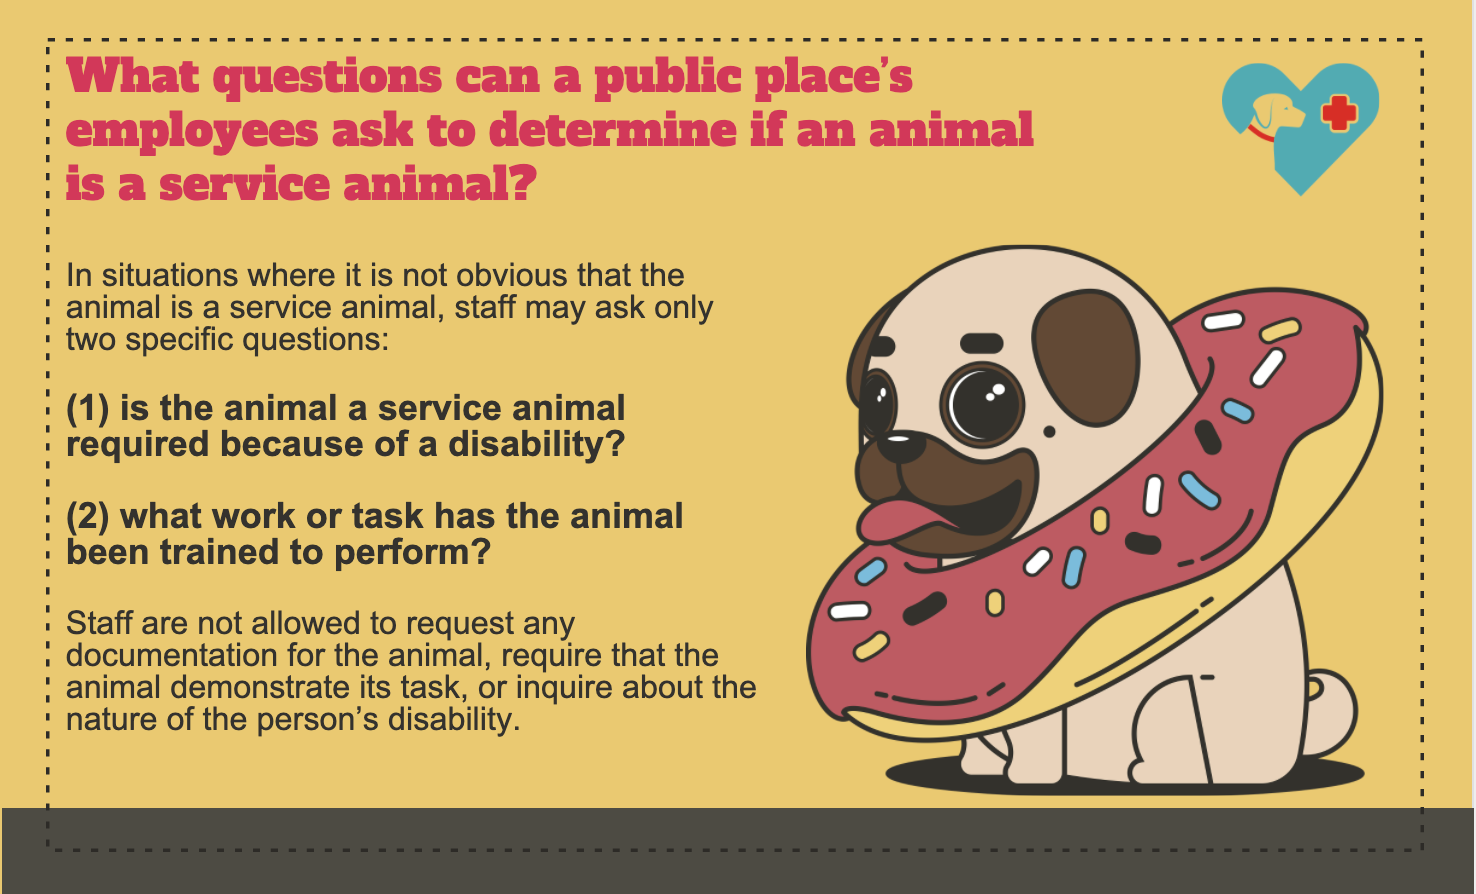 Can Service Animals Be Denied Access?